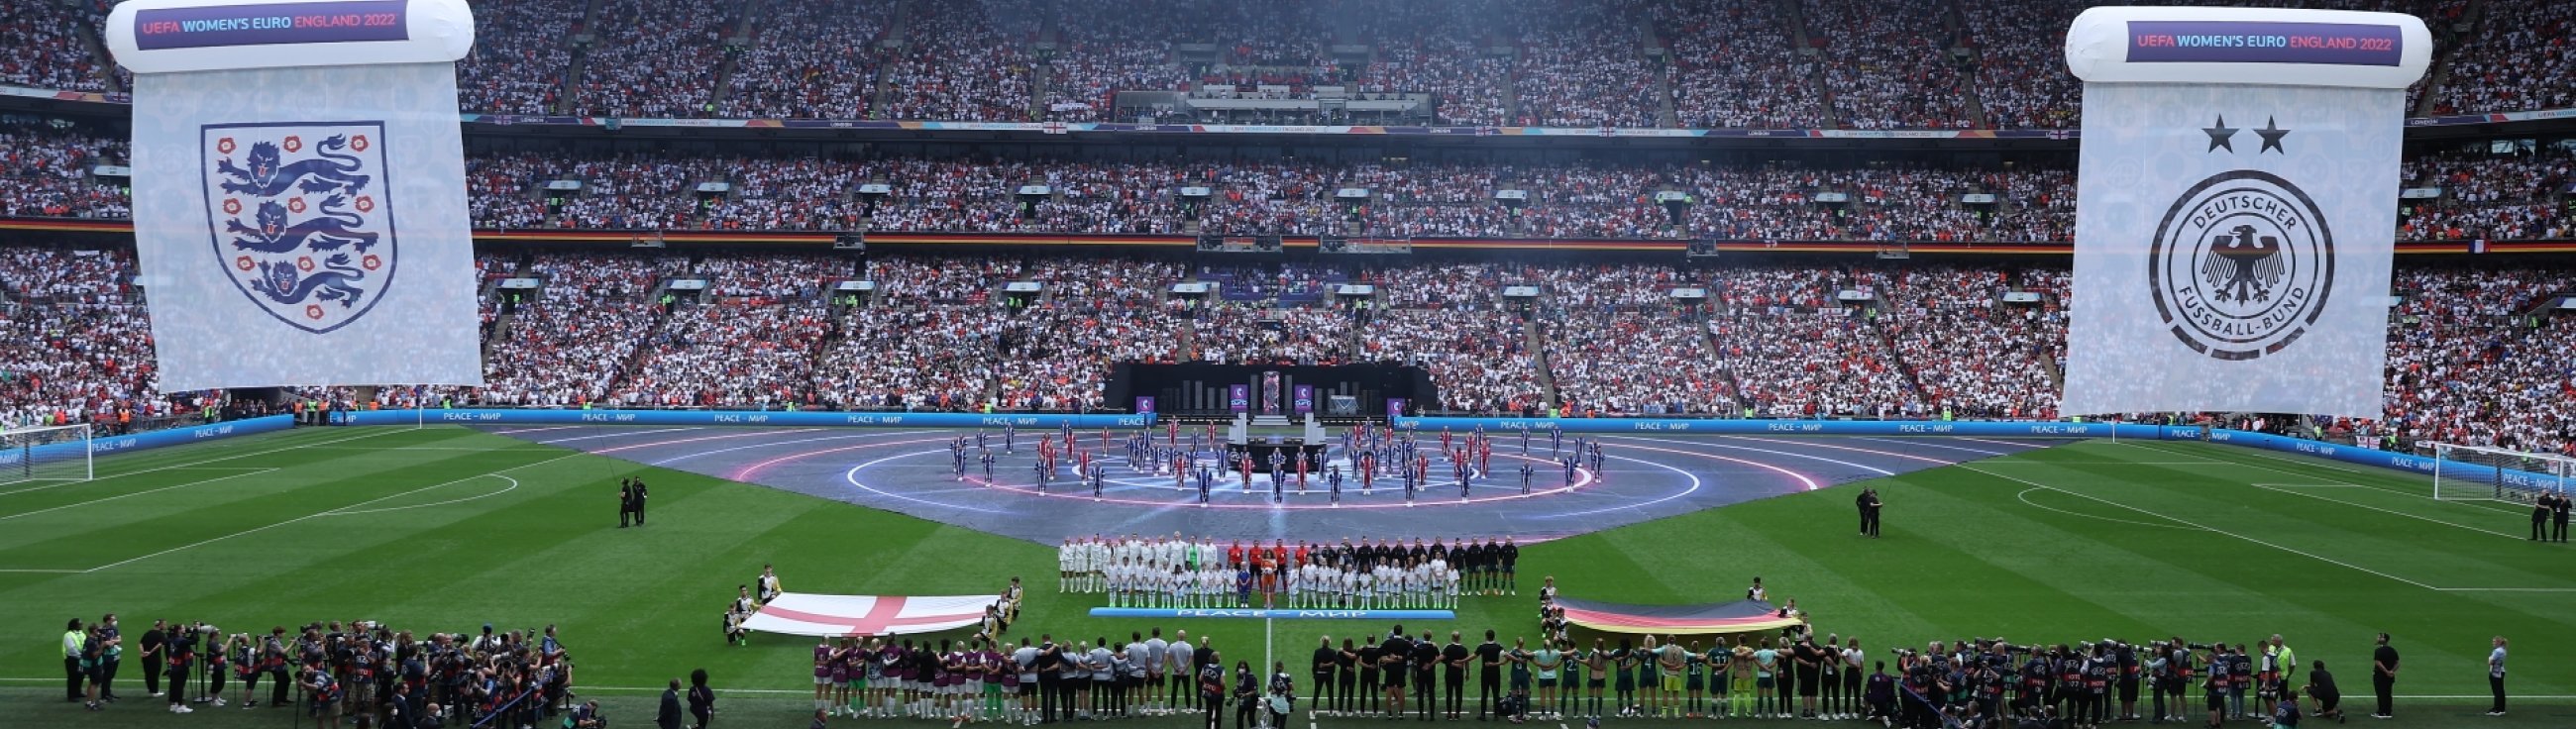 LONDON, ENGLAND - JULY 31: <<enter caption here>> during the UEFA Women's Euro 2022 final match between England and Germany at Wembley Stadium on July 31, 2022 in London, England. (Photo by Christopher Lee - UEFA/UEFA via Getty Images) *** Local Caption ***